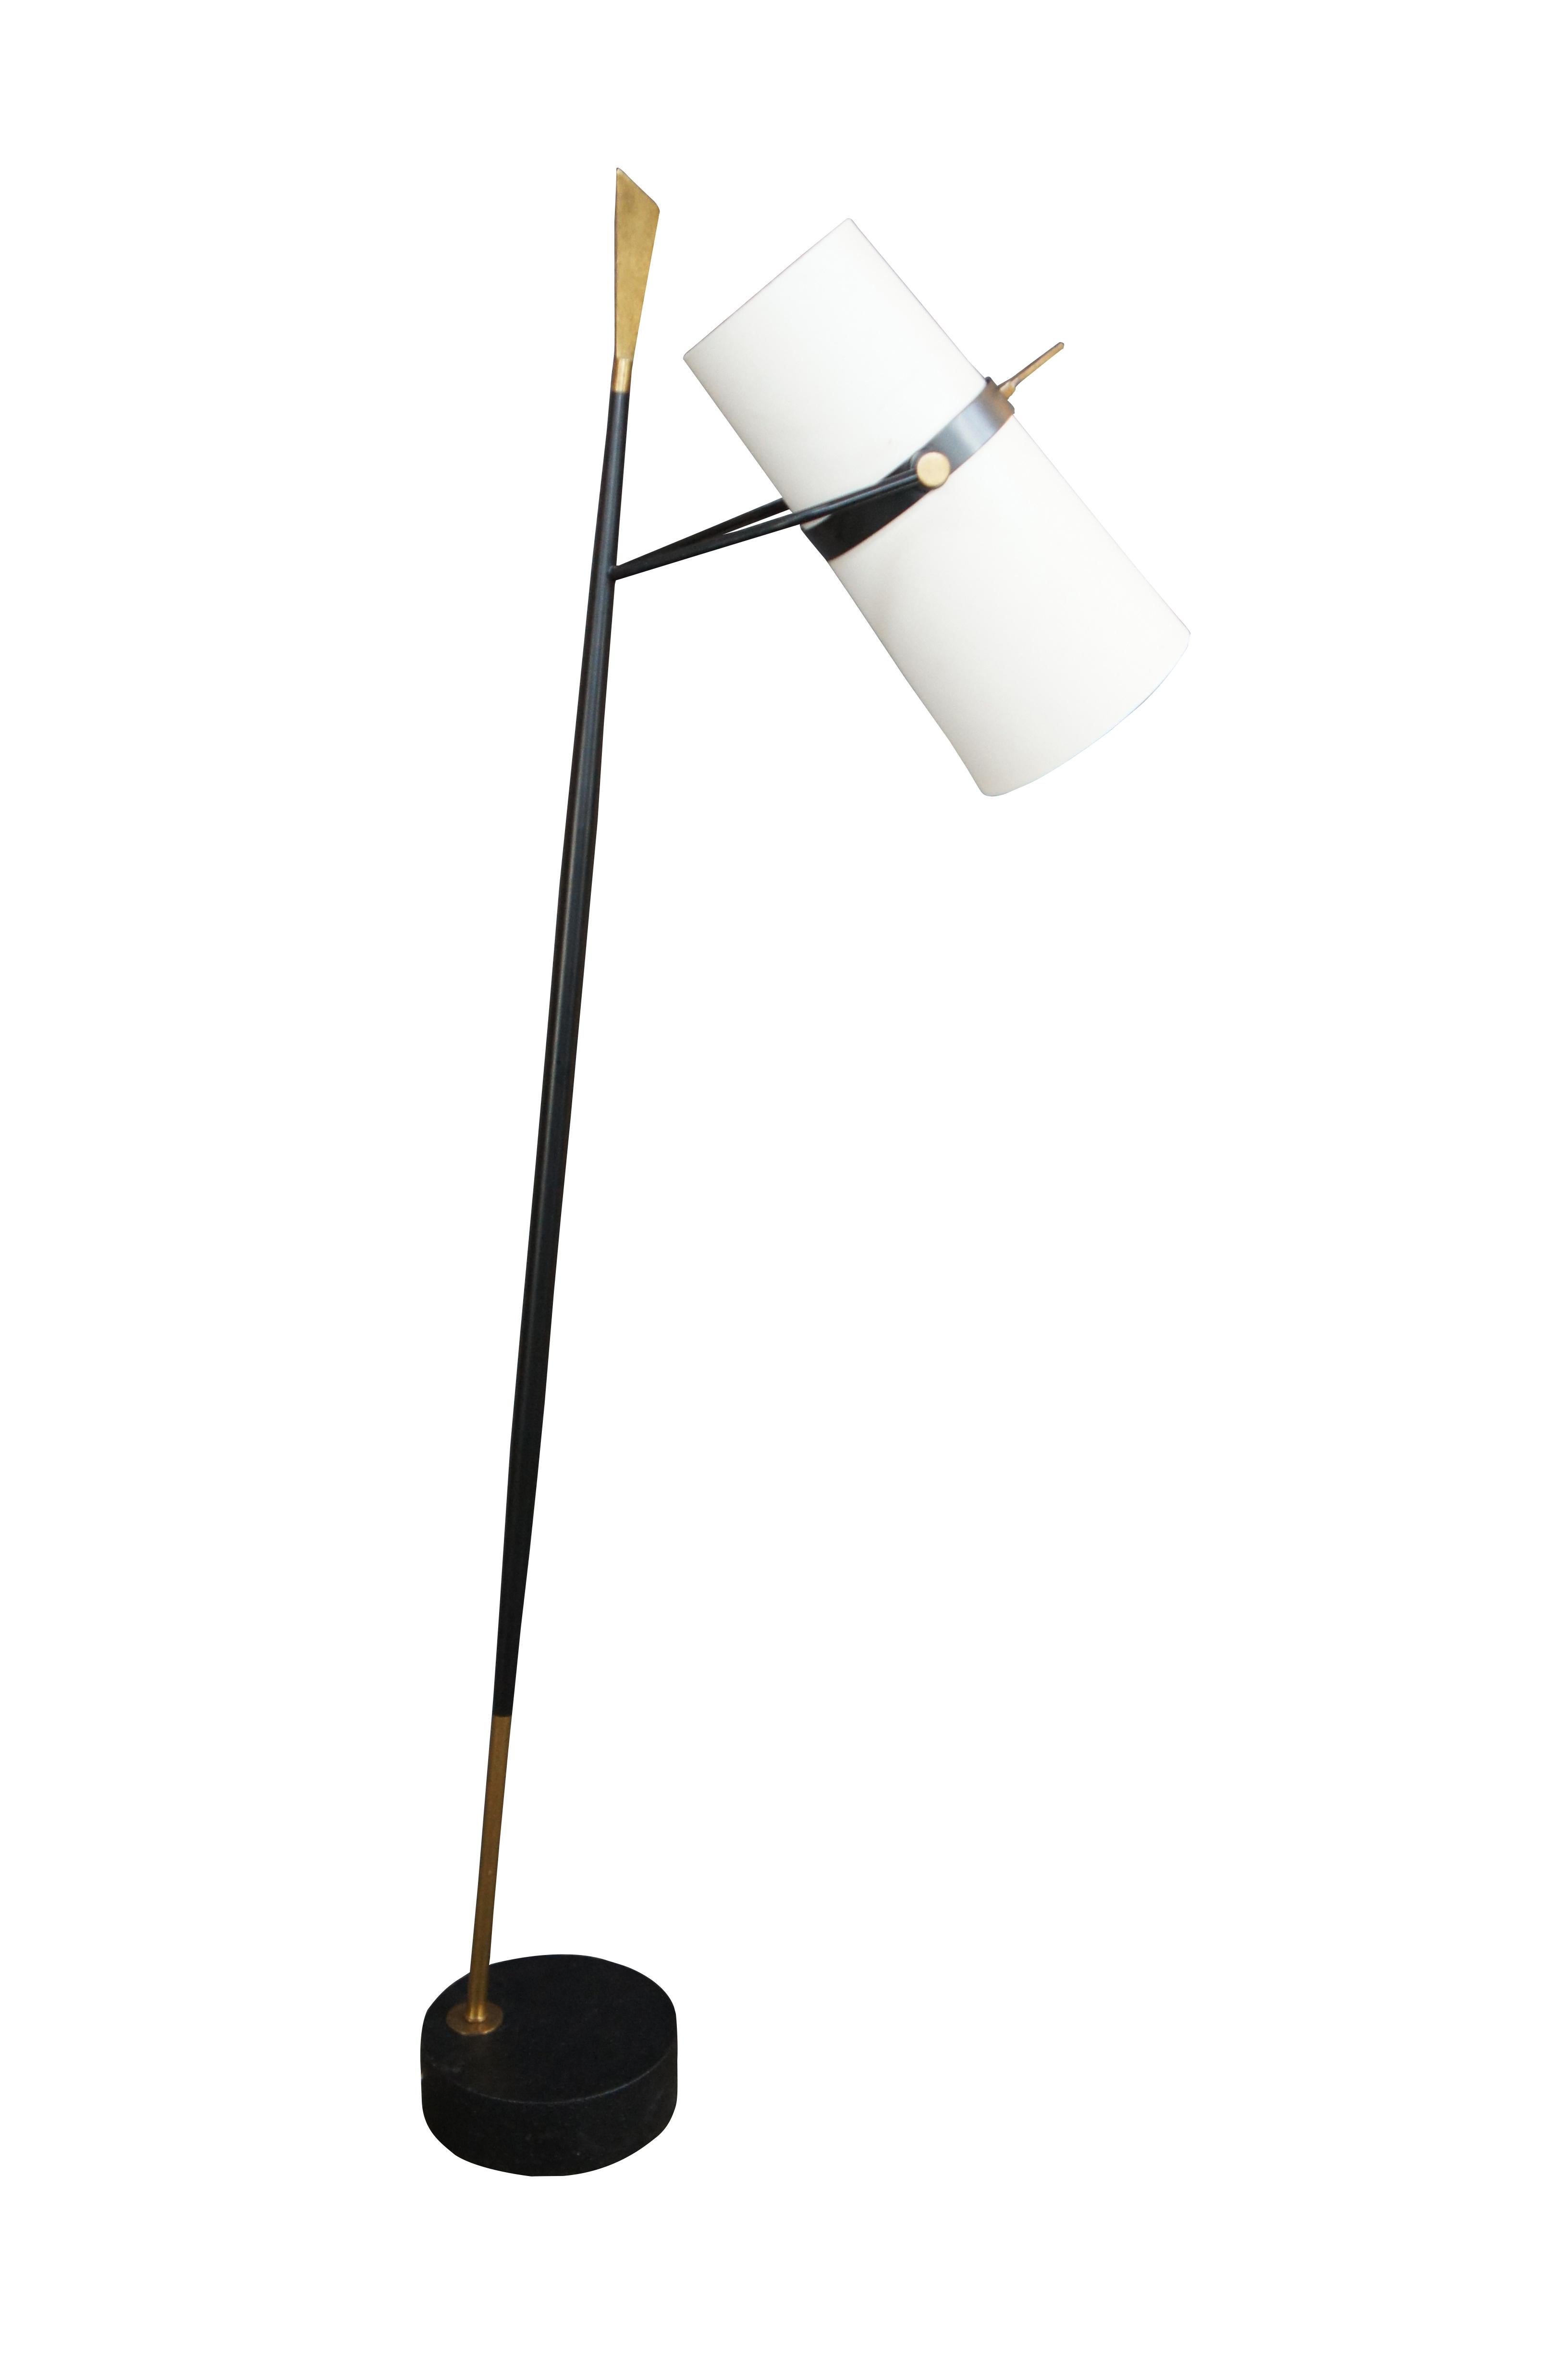 Anthroploie Yasmin Floor Lamp. A forged iron frame wraps around a soft linen shade, lending an industrial appeal to this versatile light fixture that includes two an uplight and down light.

DIMENSIONS

69.5